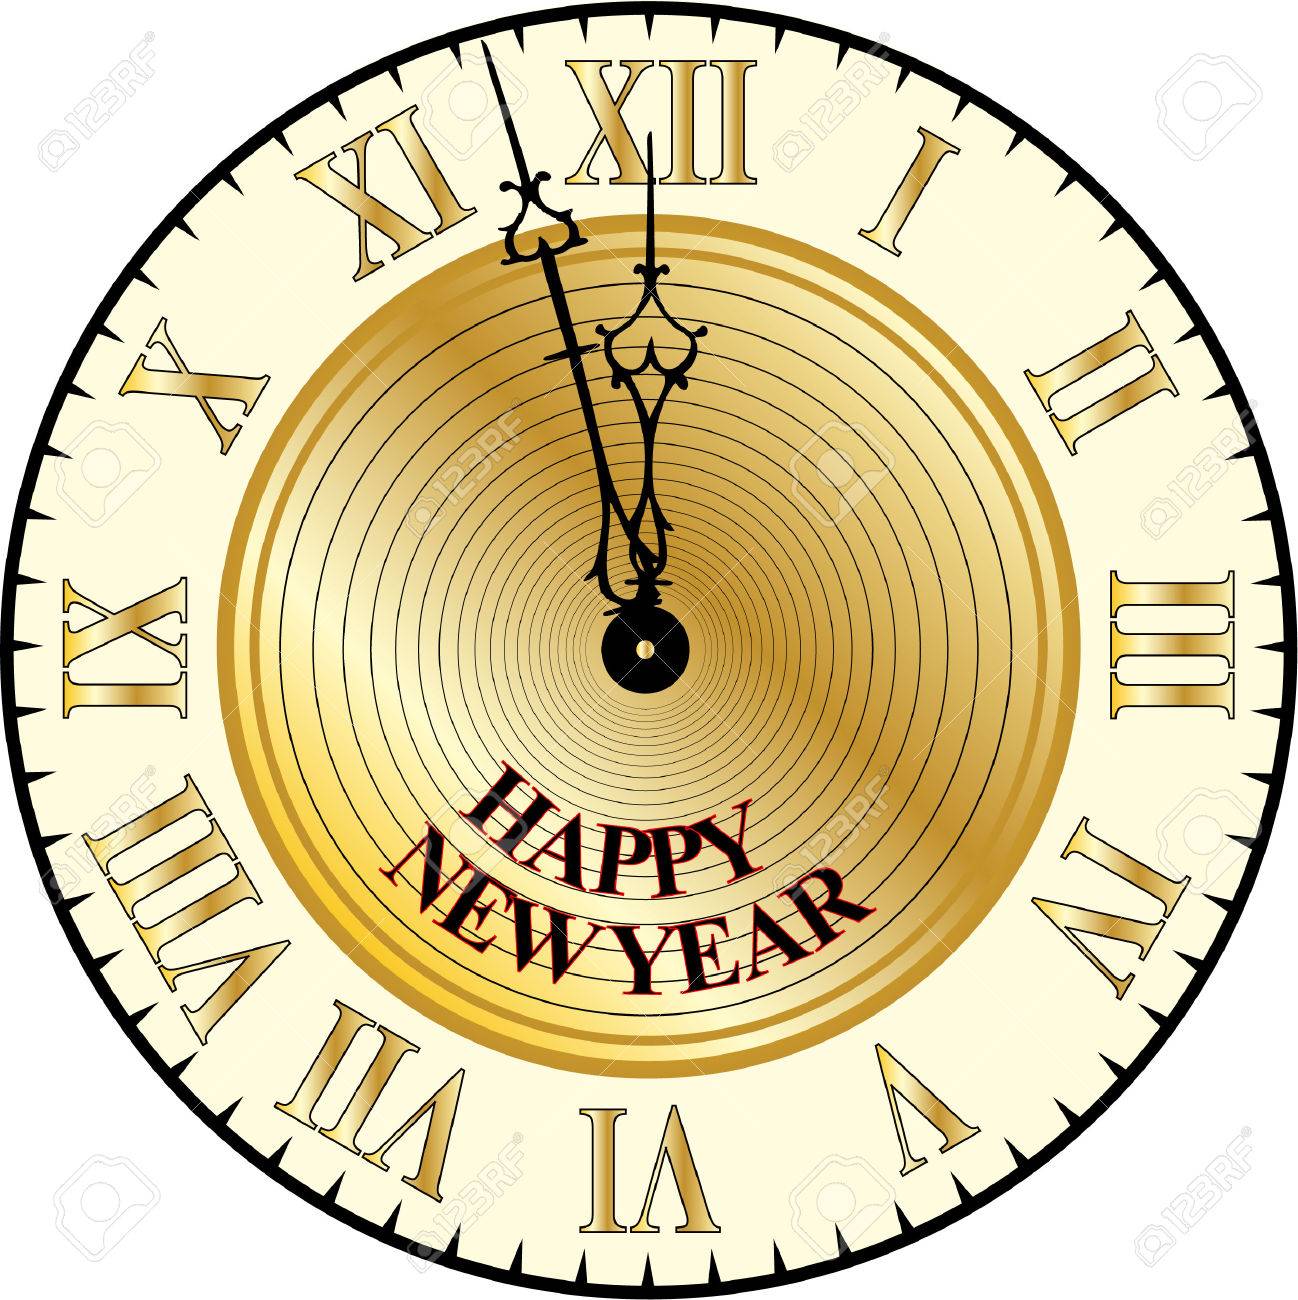 Clocks clipart new year's eve, Clocks new year's eve Transparent FREE